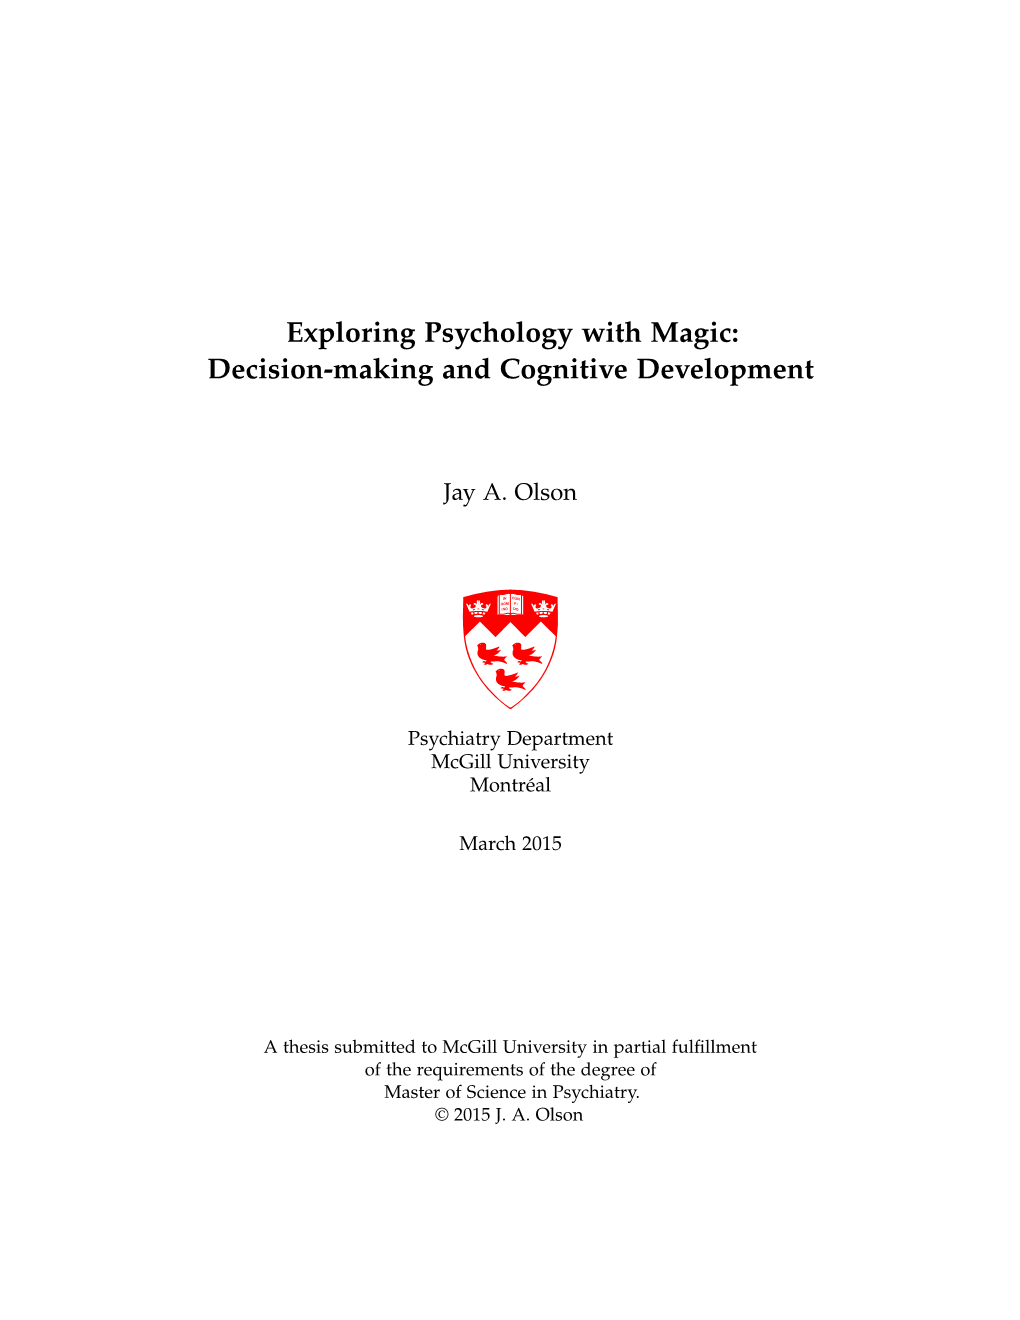 Exploring Psychology with Magic: Decision-Making and Cognitive Development